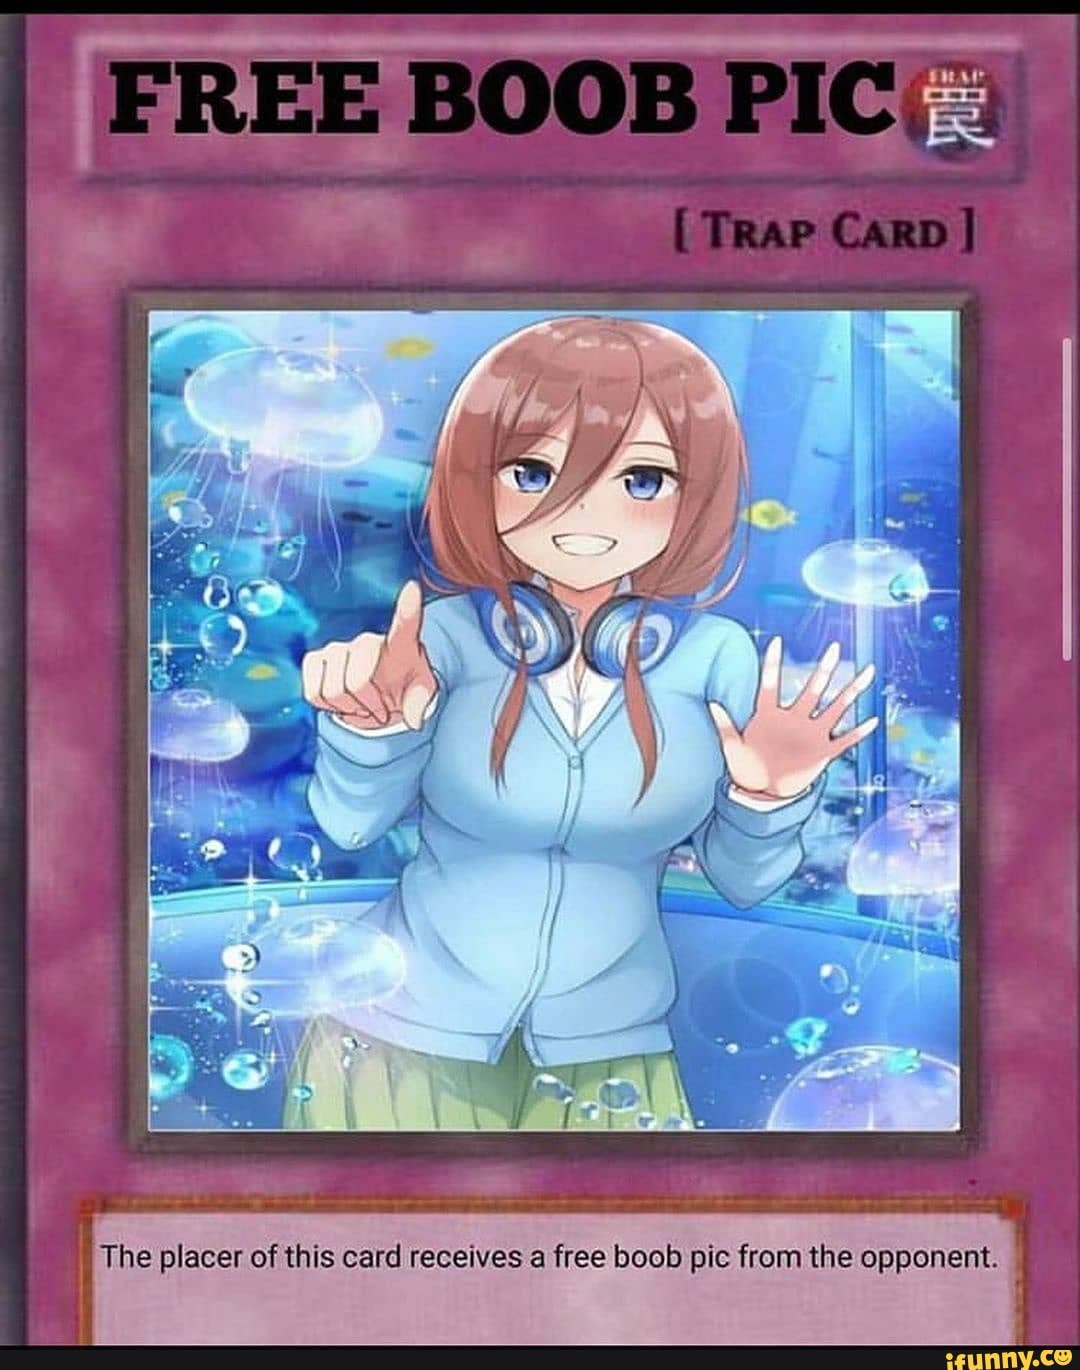 Free Boob Pic Trap Card ] The Placer Of This Card Receives A Free Boob Pic From The Opponent